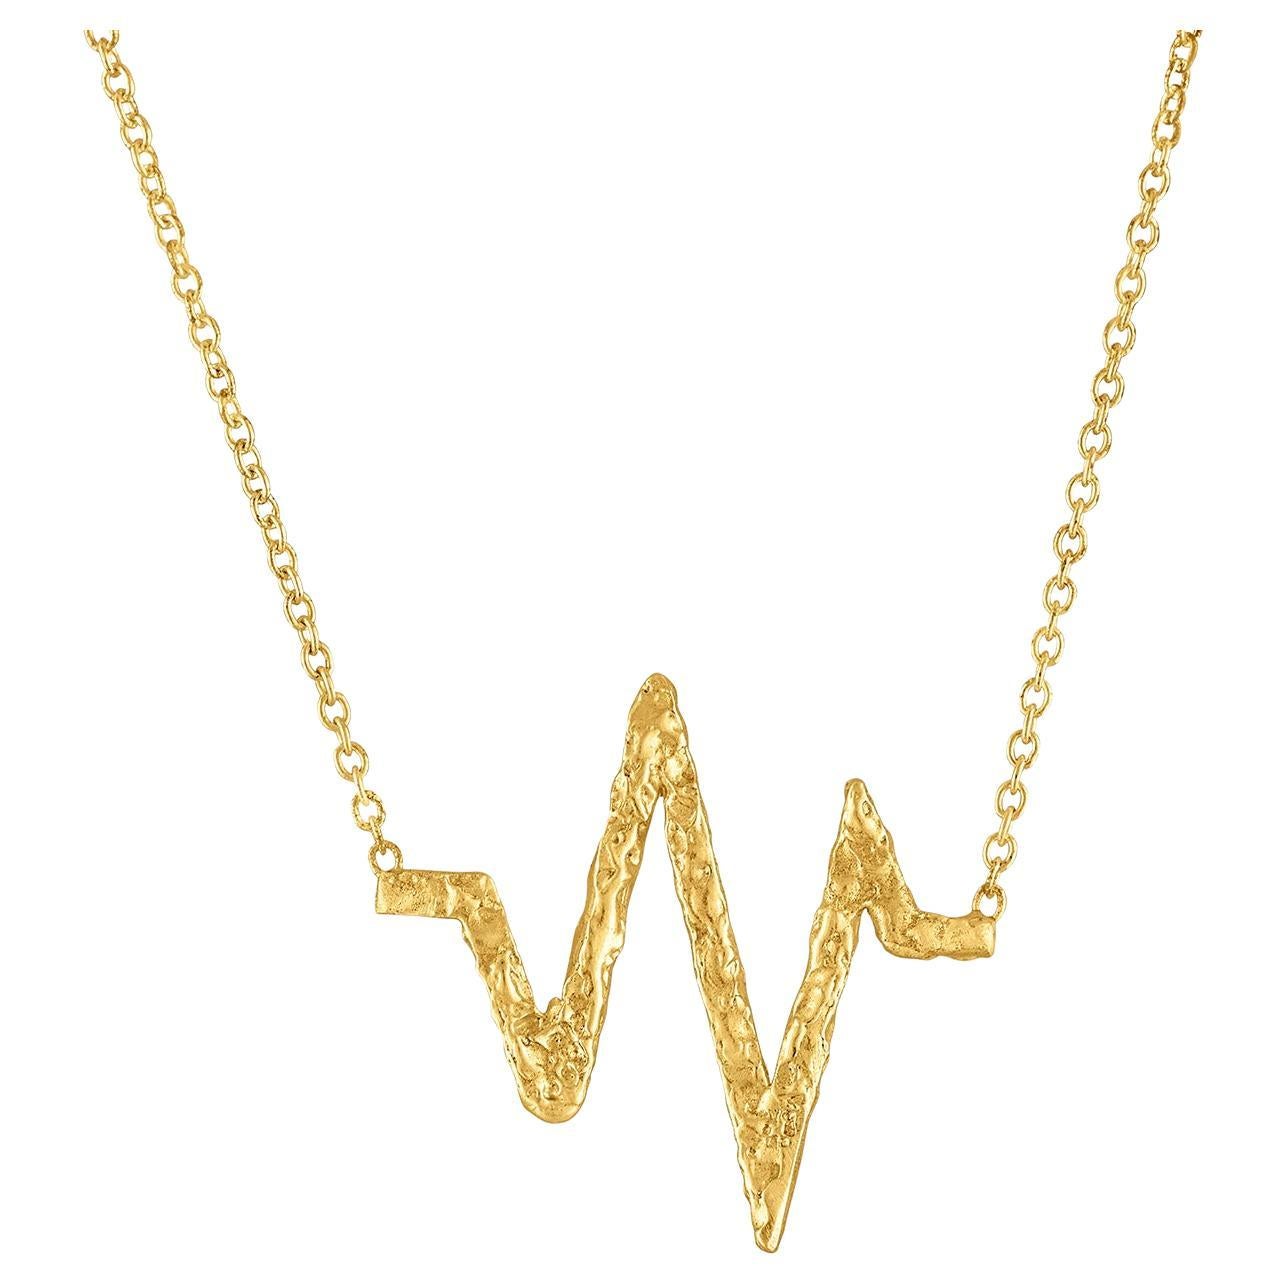 Frequency Symbol Necklace in 22k Gold, by Tagili For Sale